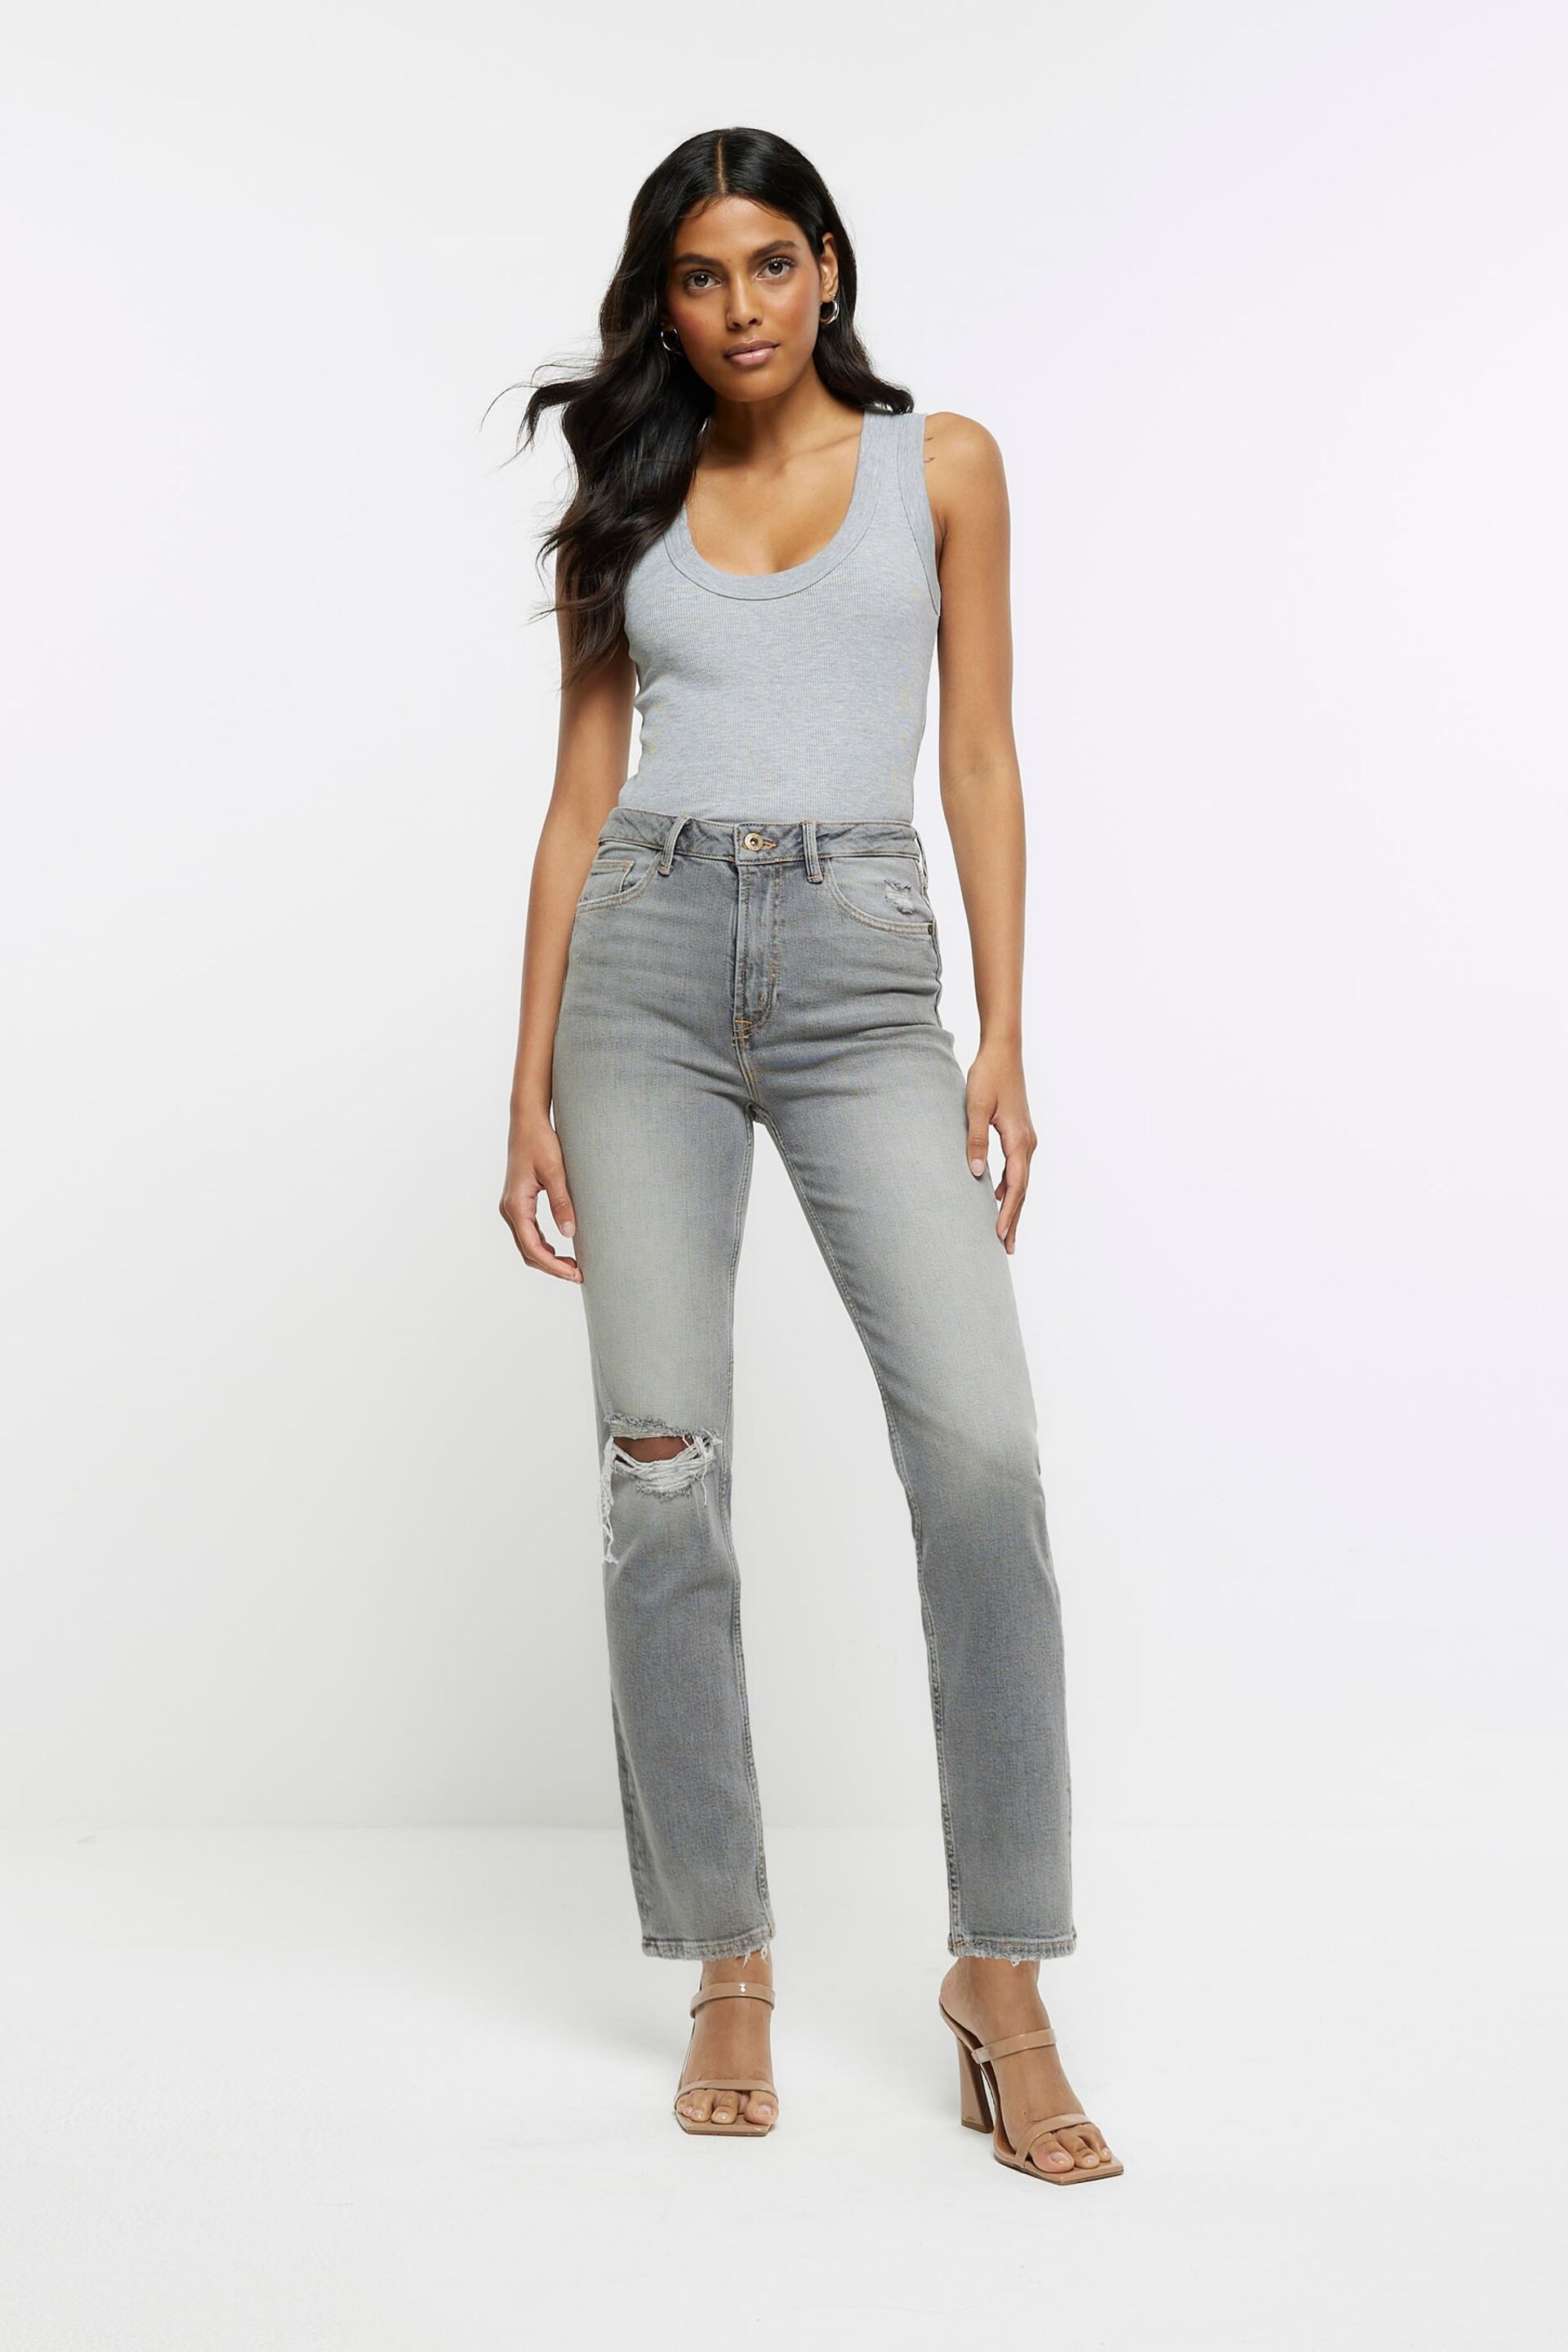 River Island Grey High Rise Slim Straight Non - Strtech Ripped Jeans - Image 1 of 5